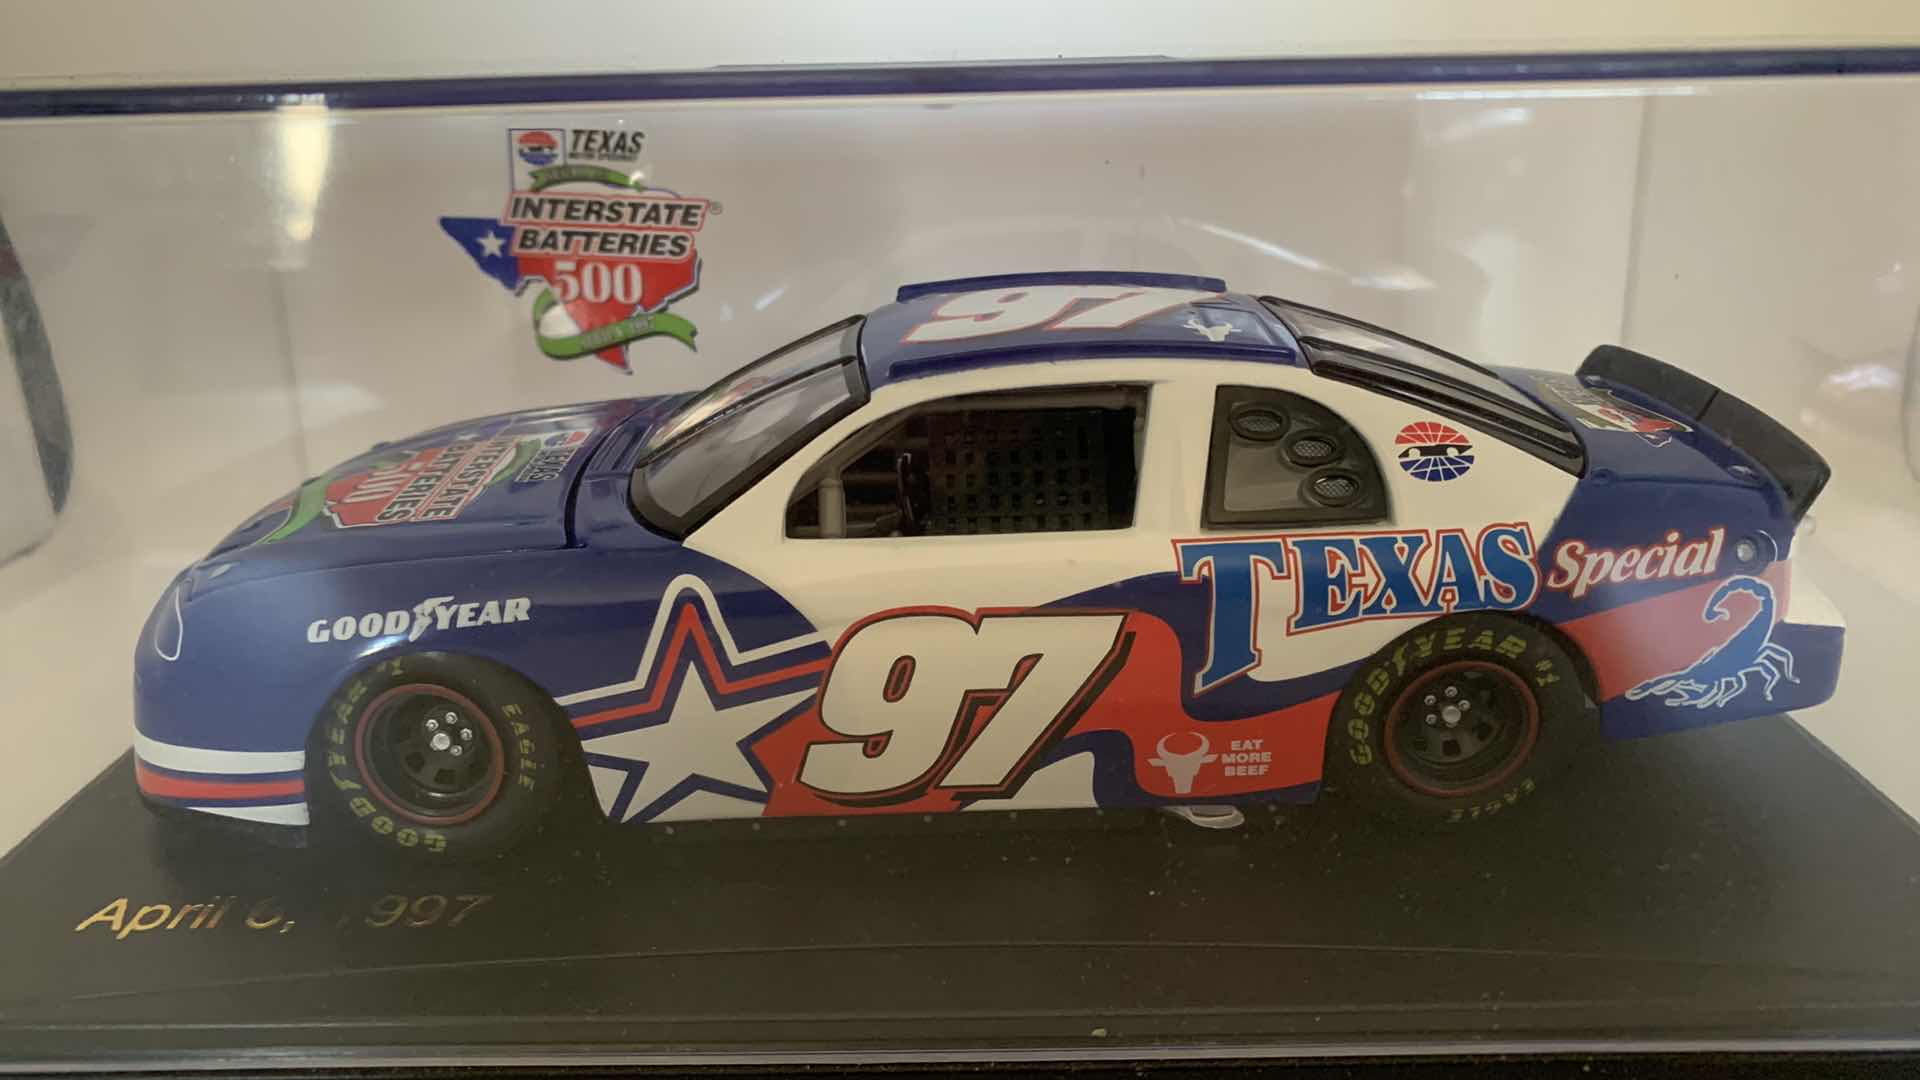 Photo 2 of SPORTS IMPRESSIONS APRIL 6, 1997 #97 TEXAS SPECIAL DIE CAST RACE CAR IN SHOW CASE.